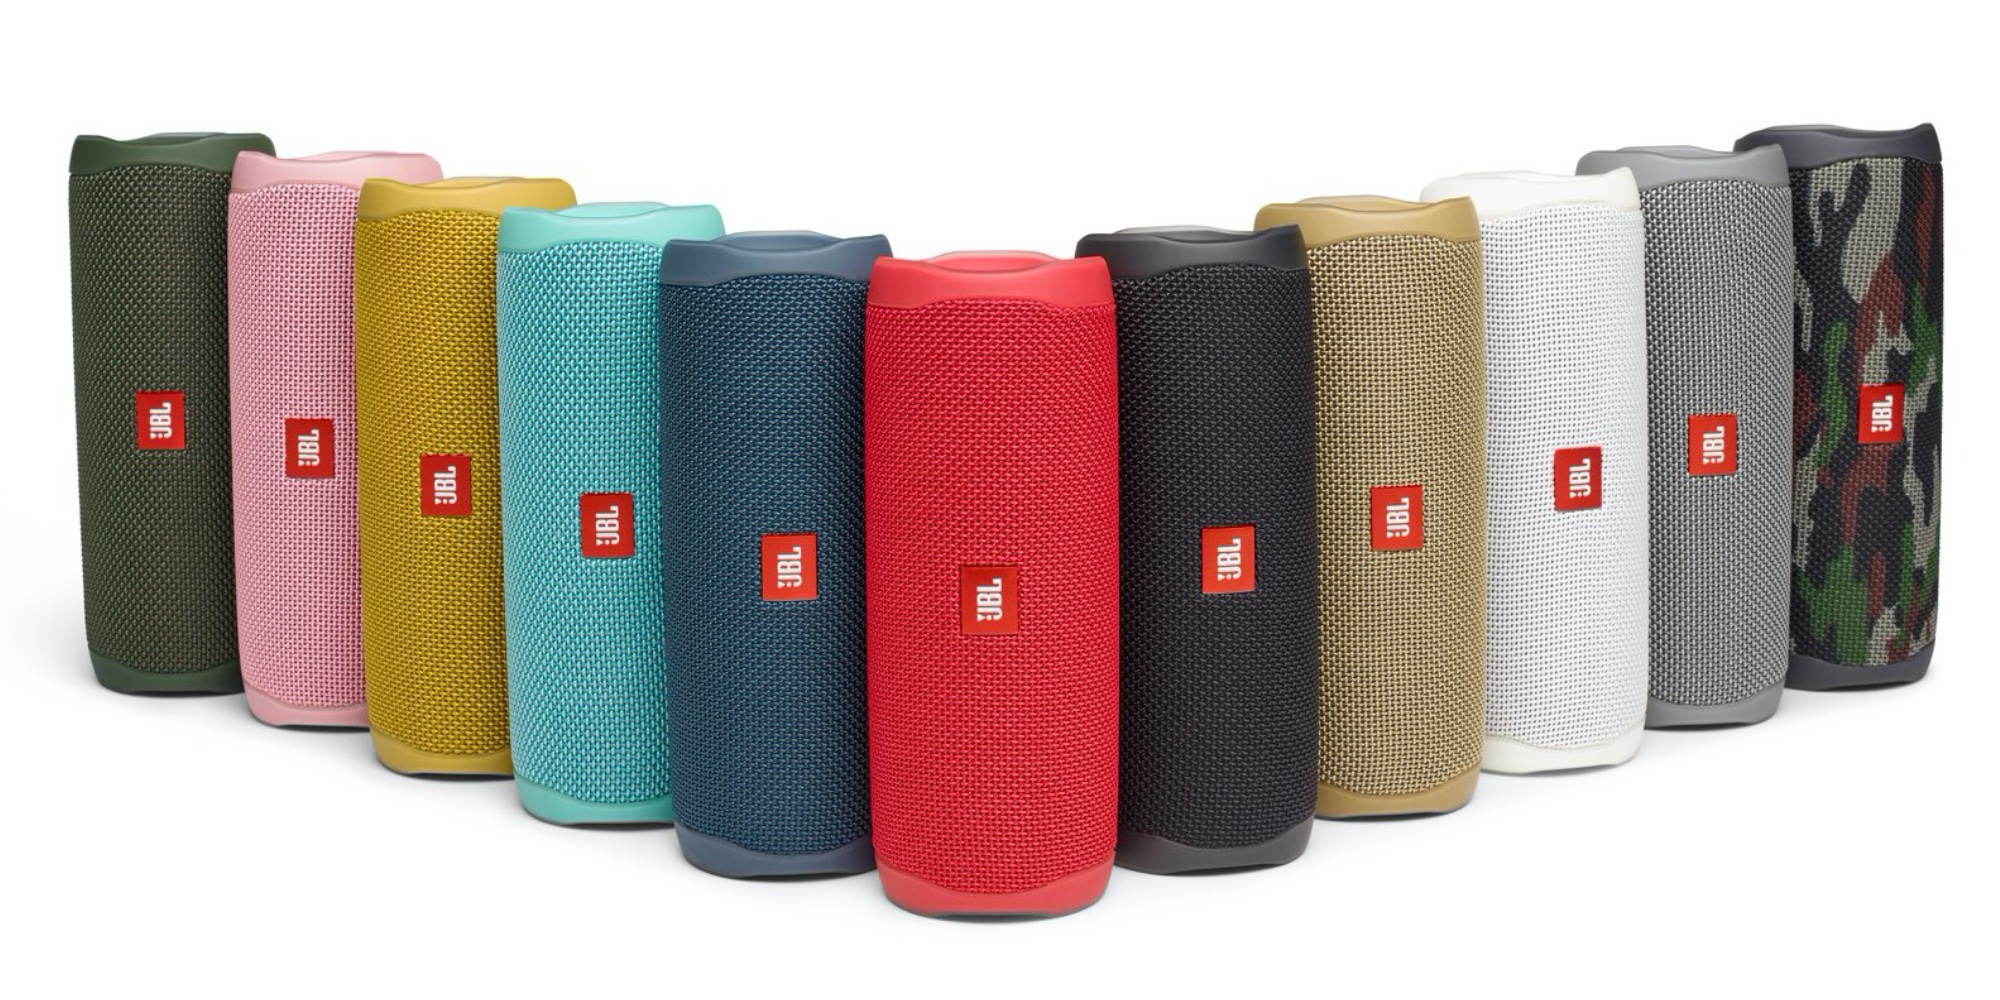 JBL's Flip 5 Bluetooth Speaker comes in a variety of colors at 90